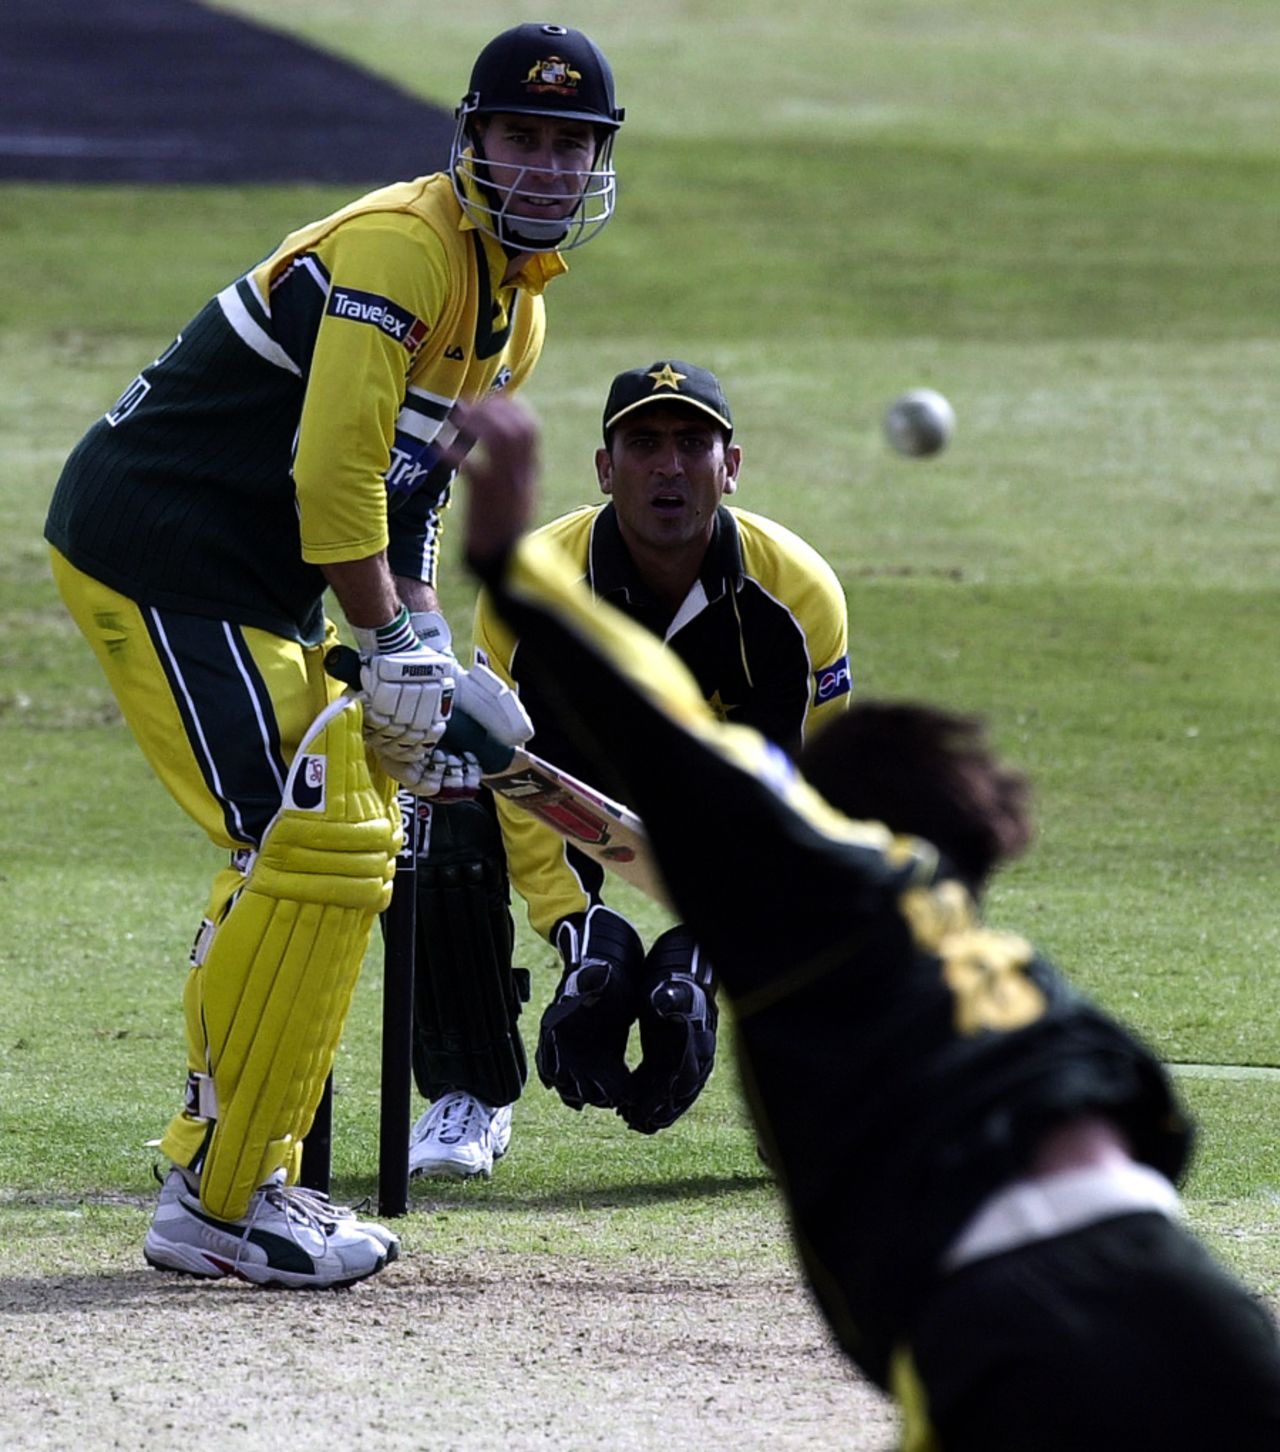 Michael Bevan watches the ball bowled by Shahid Afridi, Australia v Pakistan, NatWest Trophy, Cardiff, June 9, 2001